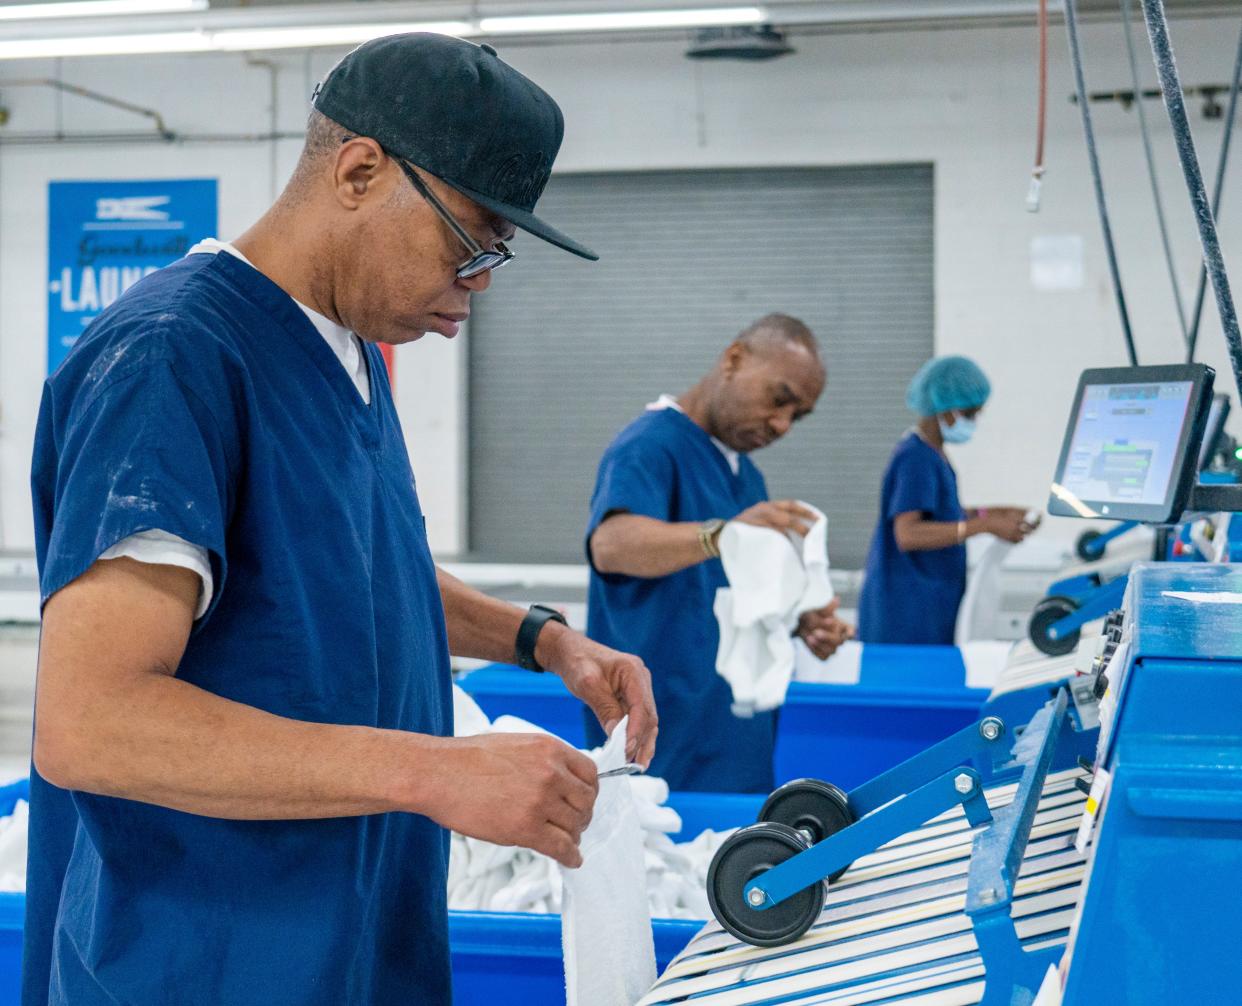 Lawrence Parker, from left, Michael Alexander and Rosalyn Burch run linens through an automatic folder at the Goodwill's James O. Wright Center for Work & Training in Milwaukee. It has one of the largest laundry facilities in Wisconsin, providing services for hospitals, clinics, nursing homes and the military throughout the state and northern Illinois.